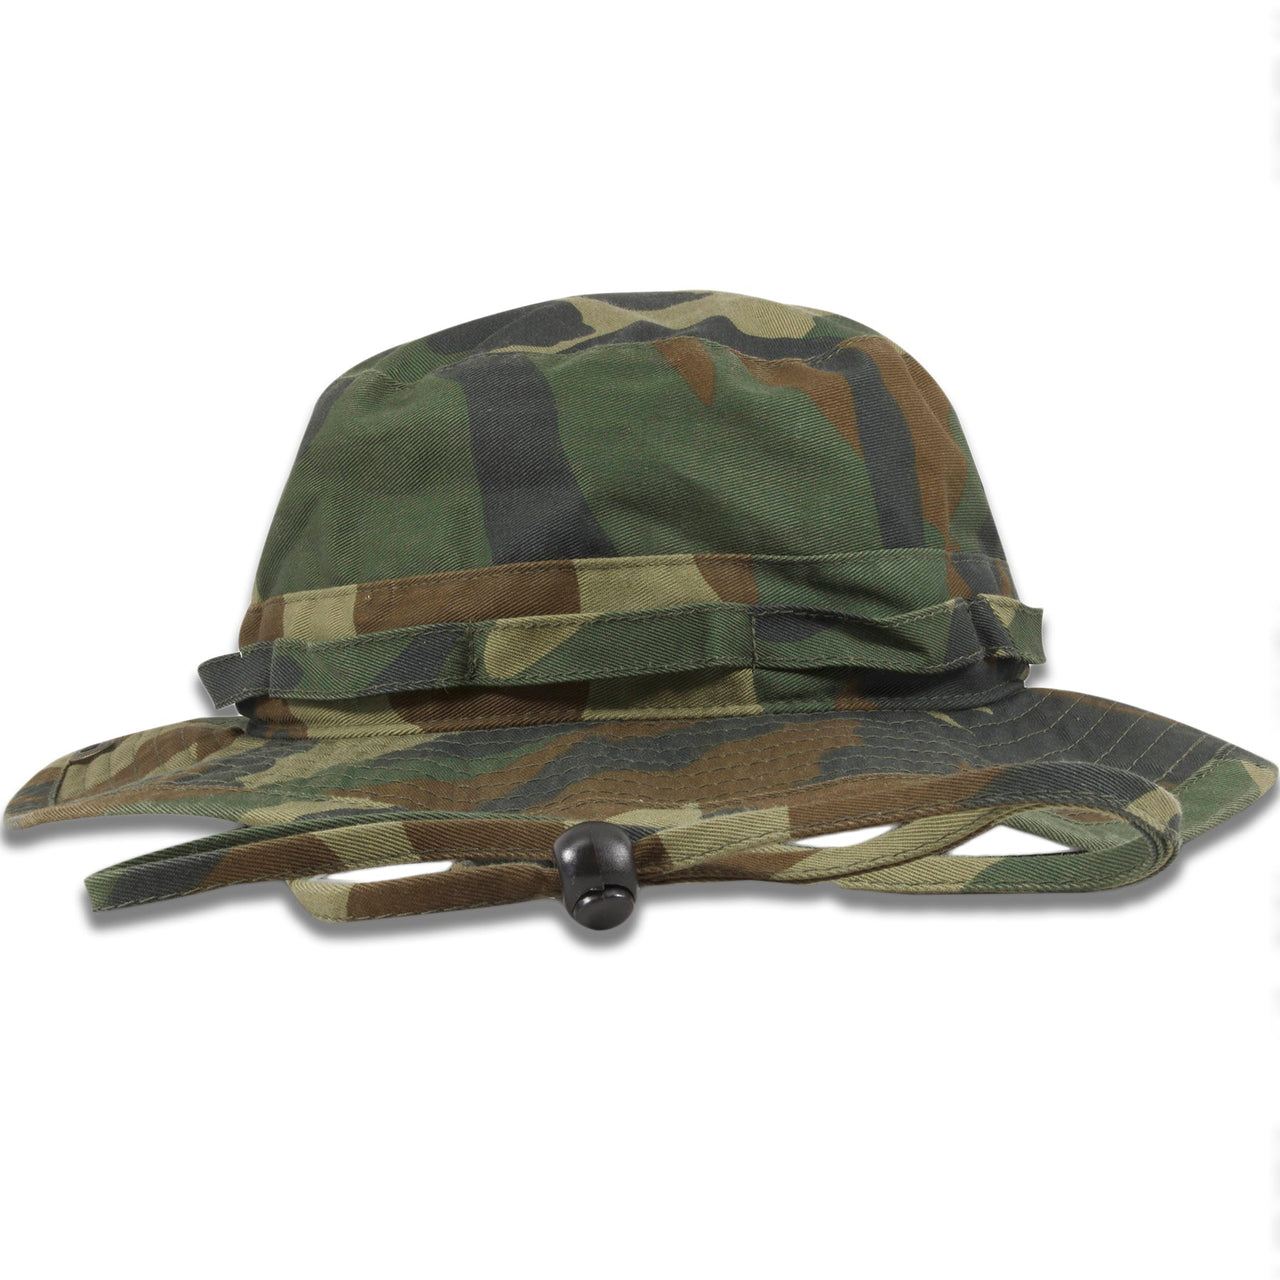 The camouflage boonie bucket hat is solid camouflage with an adjustable camouflage patterned drawstring